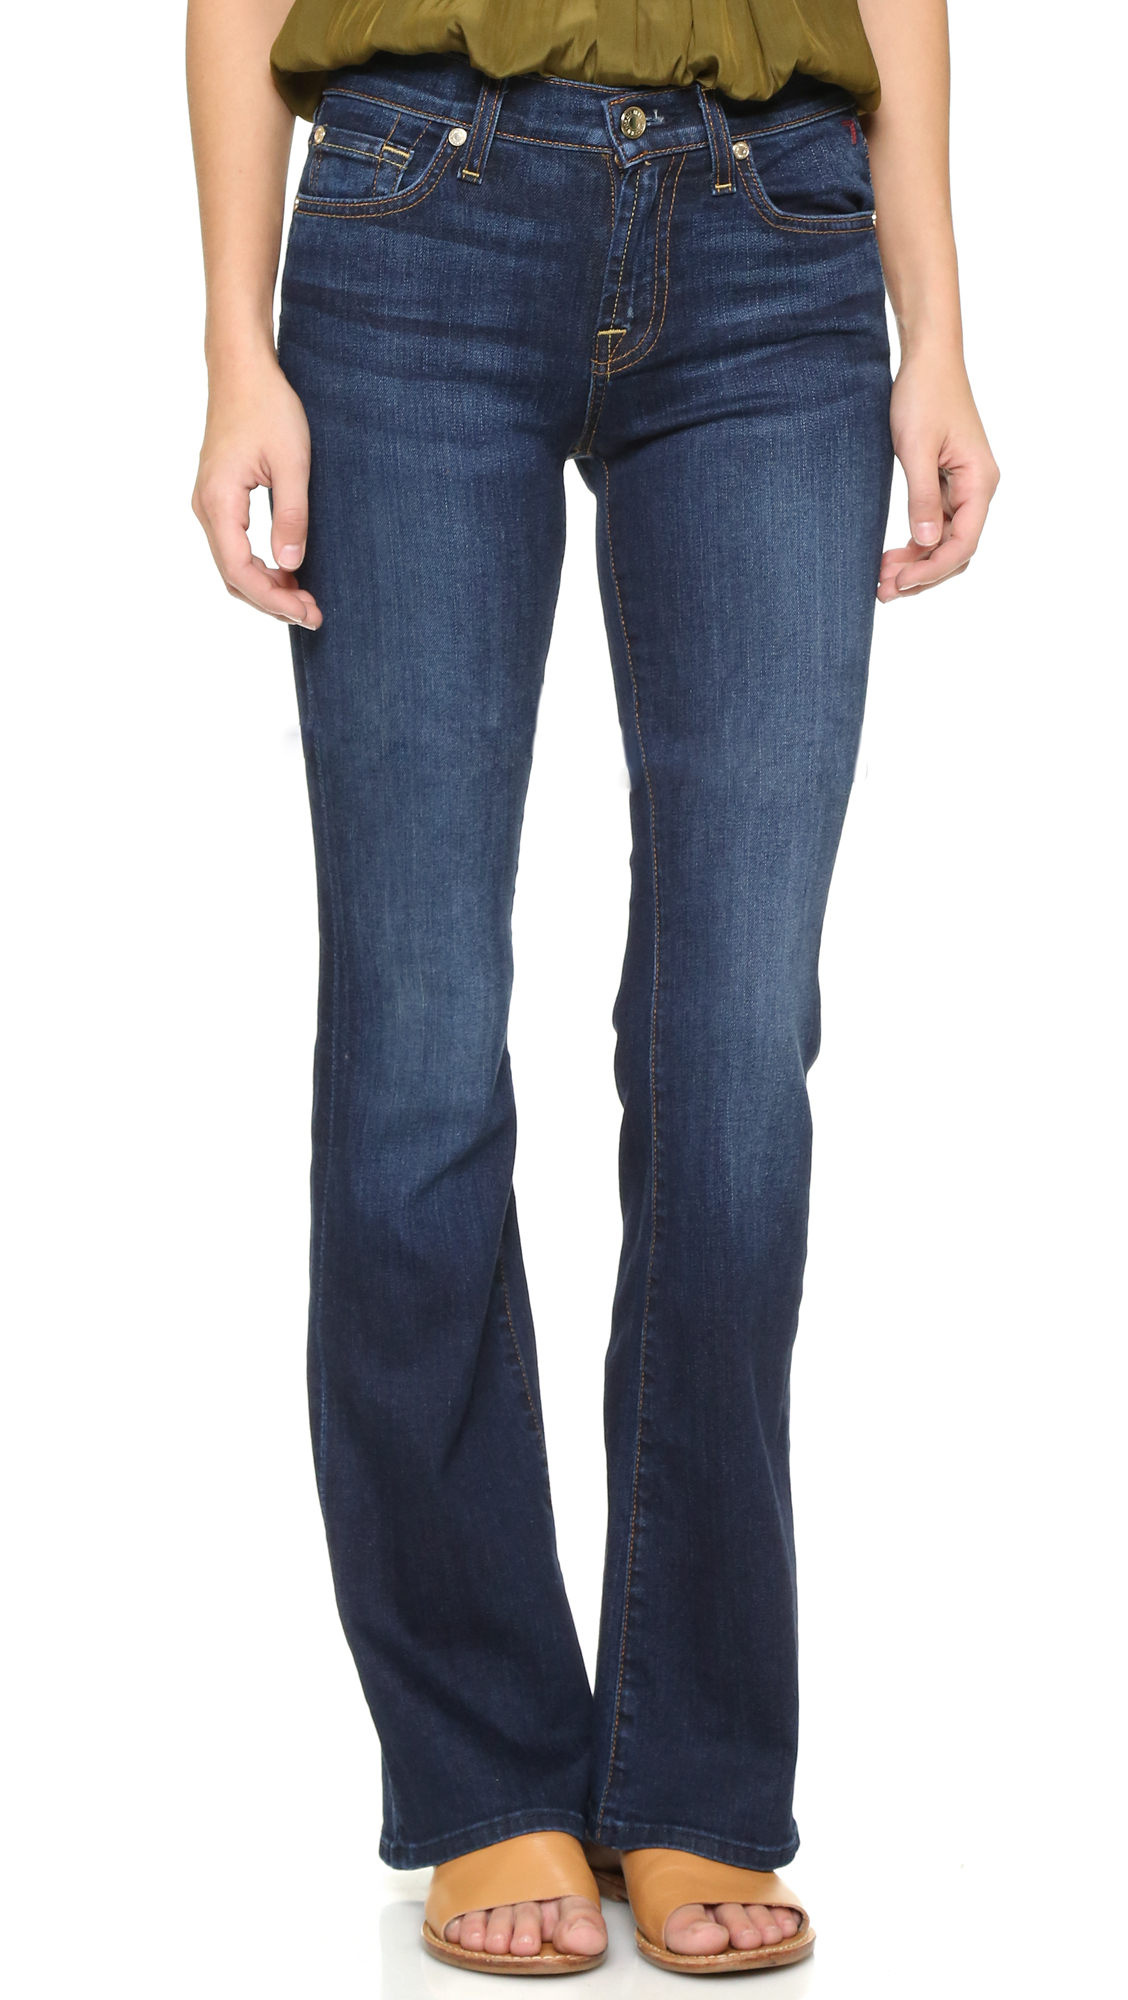 Lyst - 7 For All Mankind Iconic Boot Cut Jeans in Blue